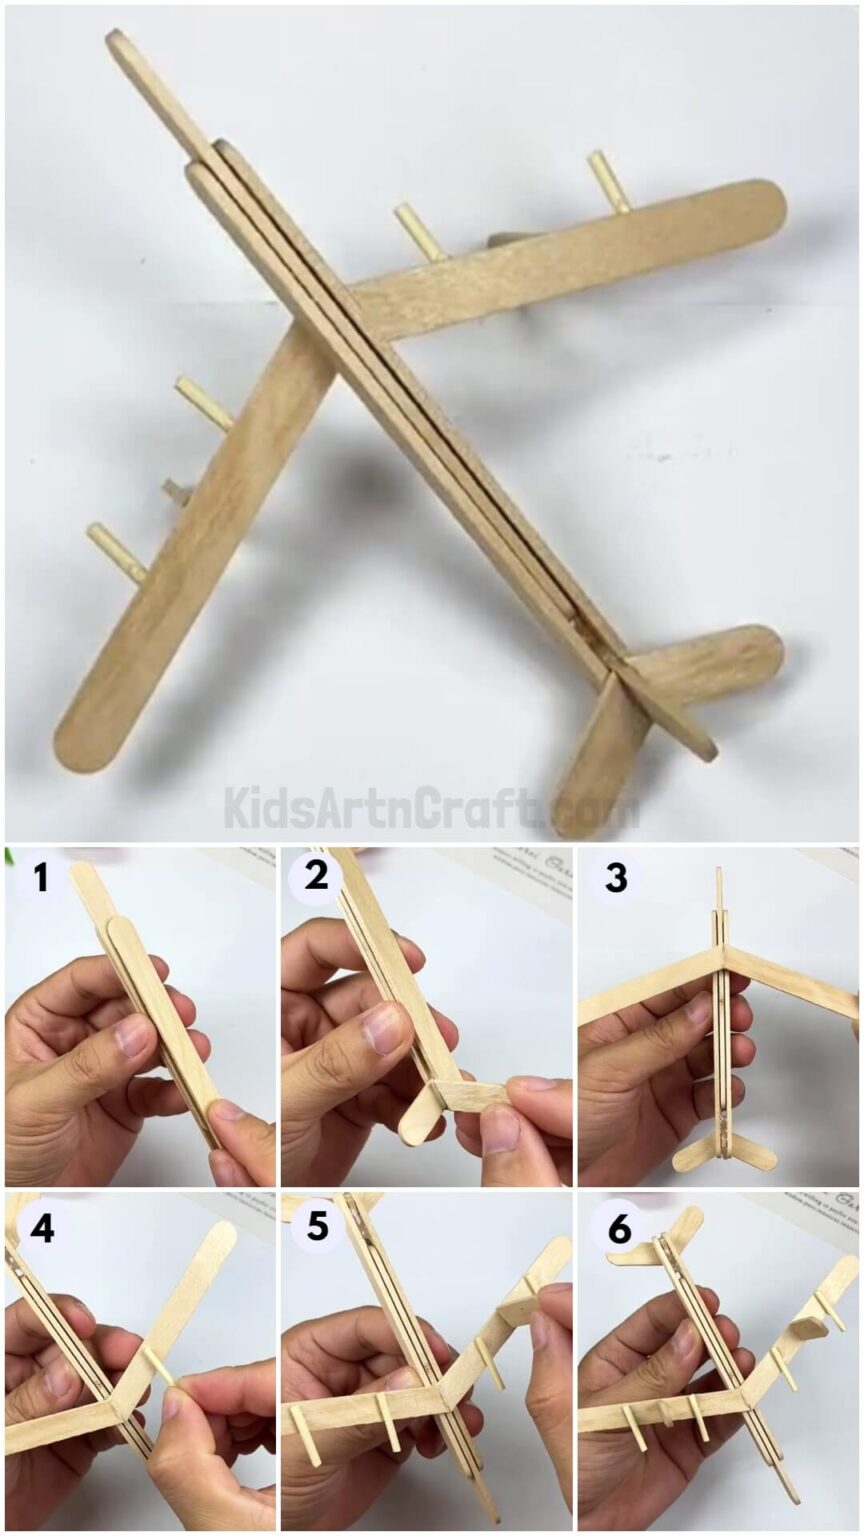 Cool Airplane Popsicle Stick Craft Step-by-step Tutorial For Kids ...